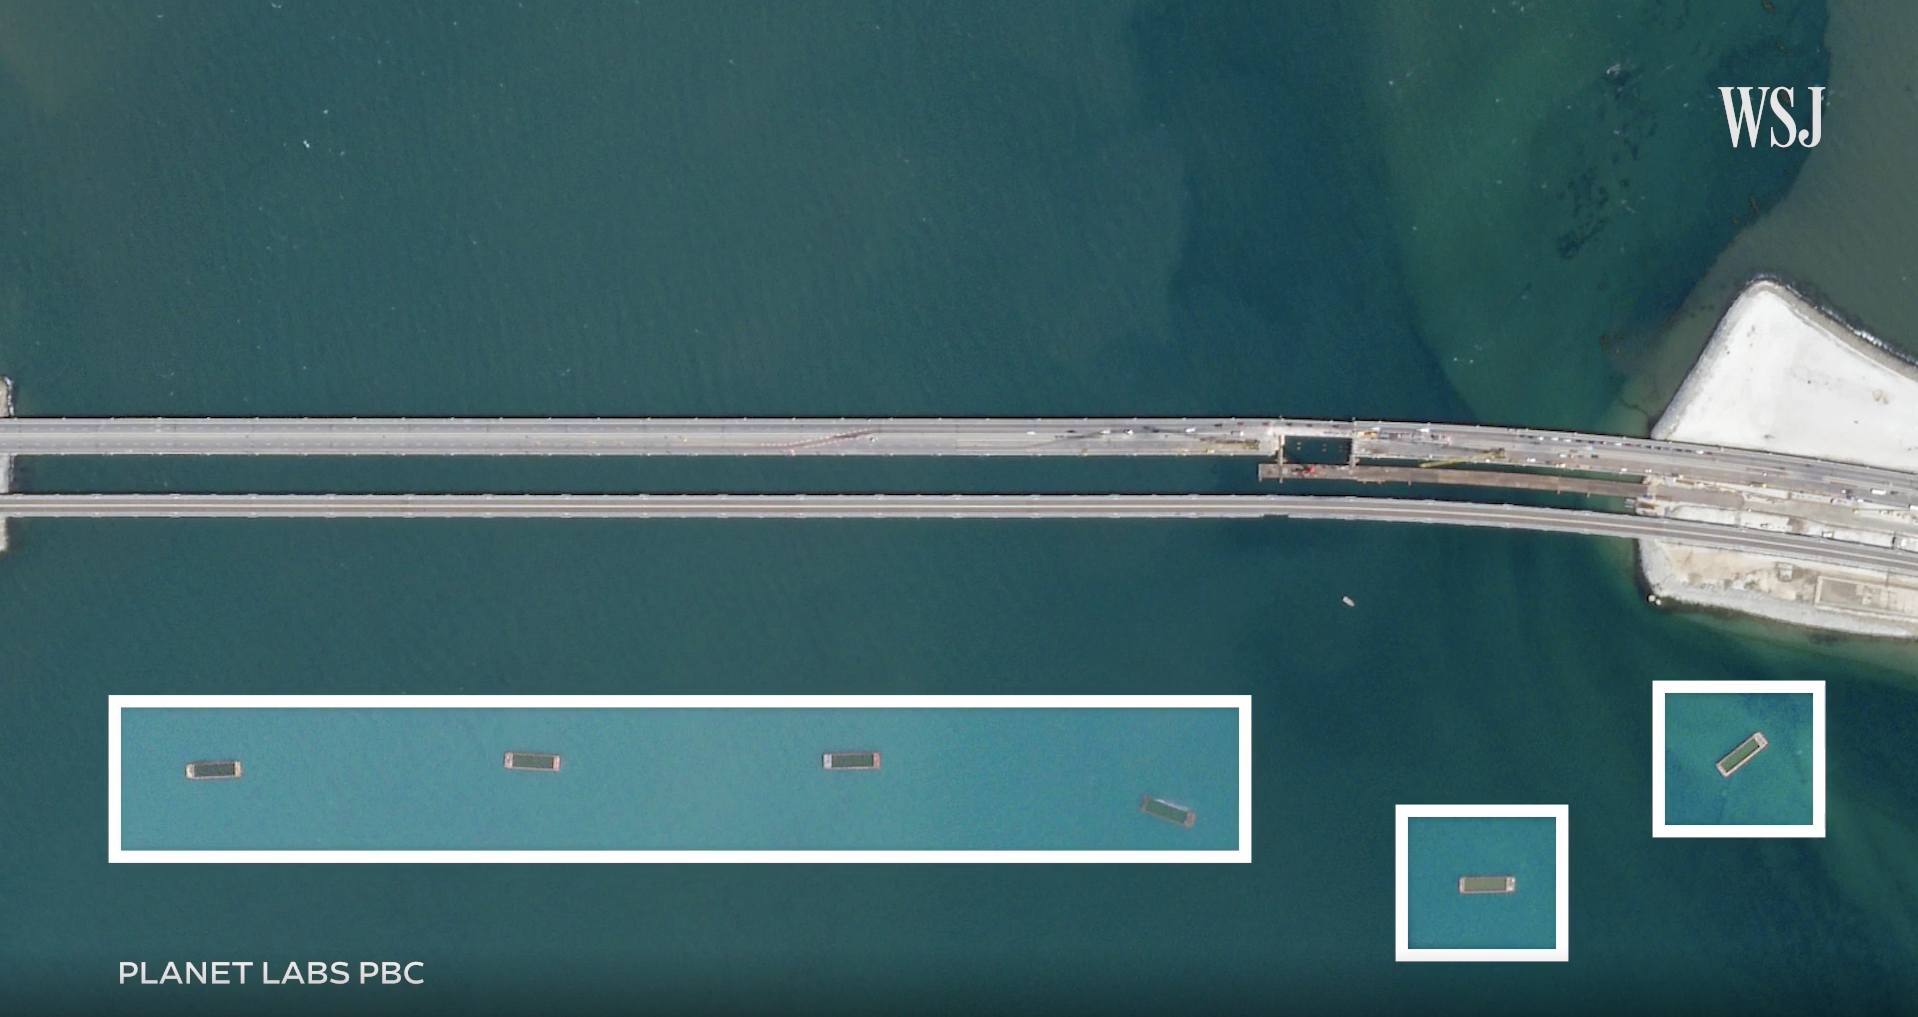 Why the Battle for This $3.6 Billion Bridge Is So Important to Putin